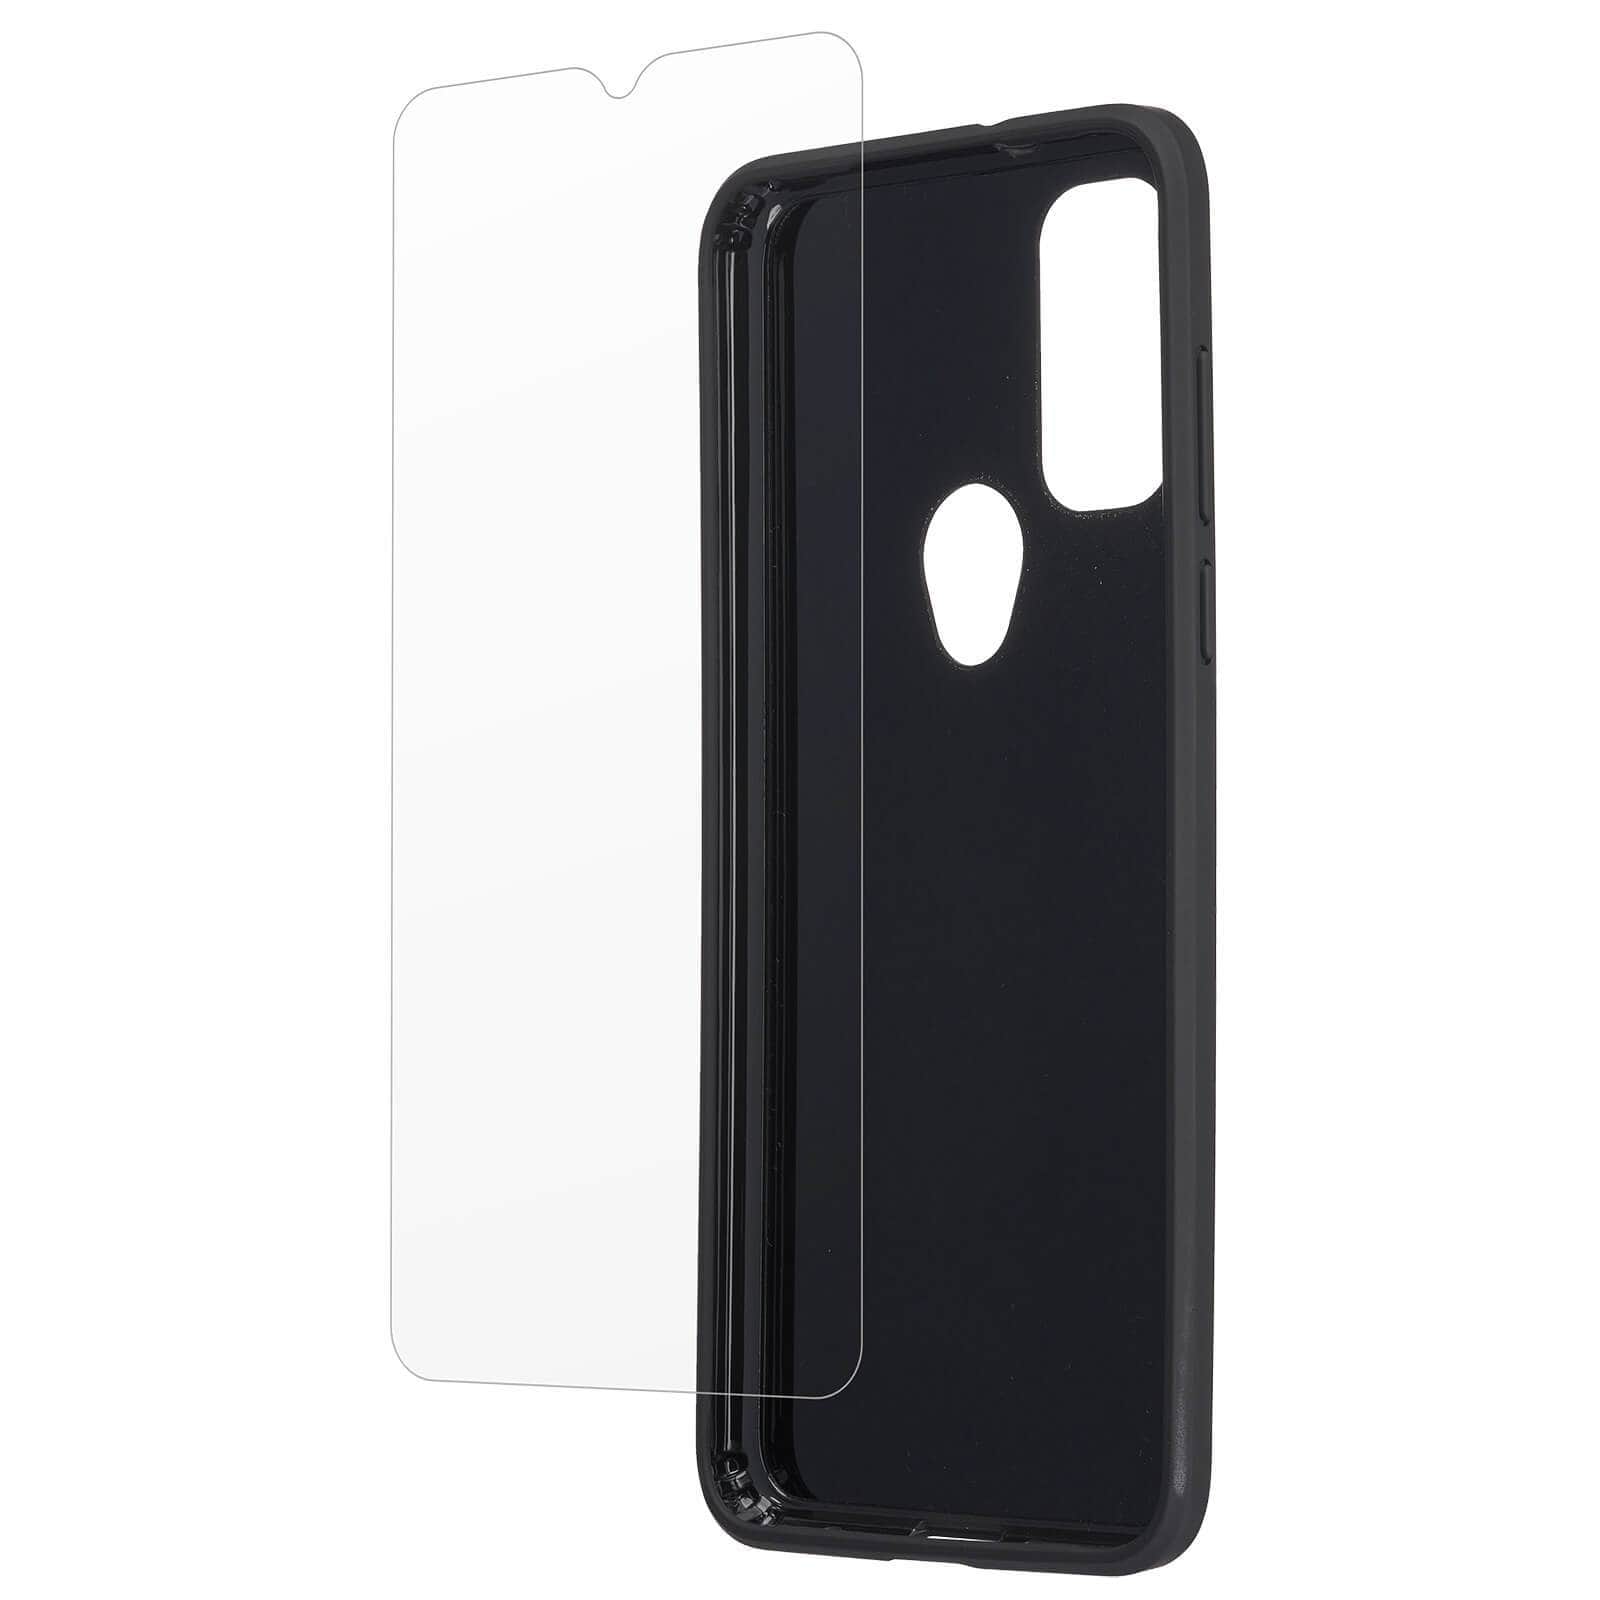 SCREEN PROTECTOR HOVERING IN FRONT OF TOUGH BLACK CASE. COLOR::BLACK